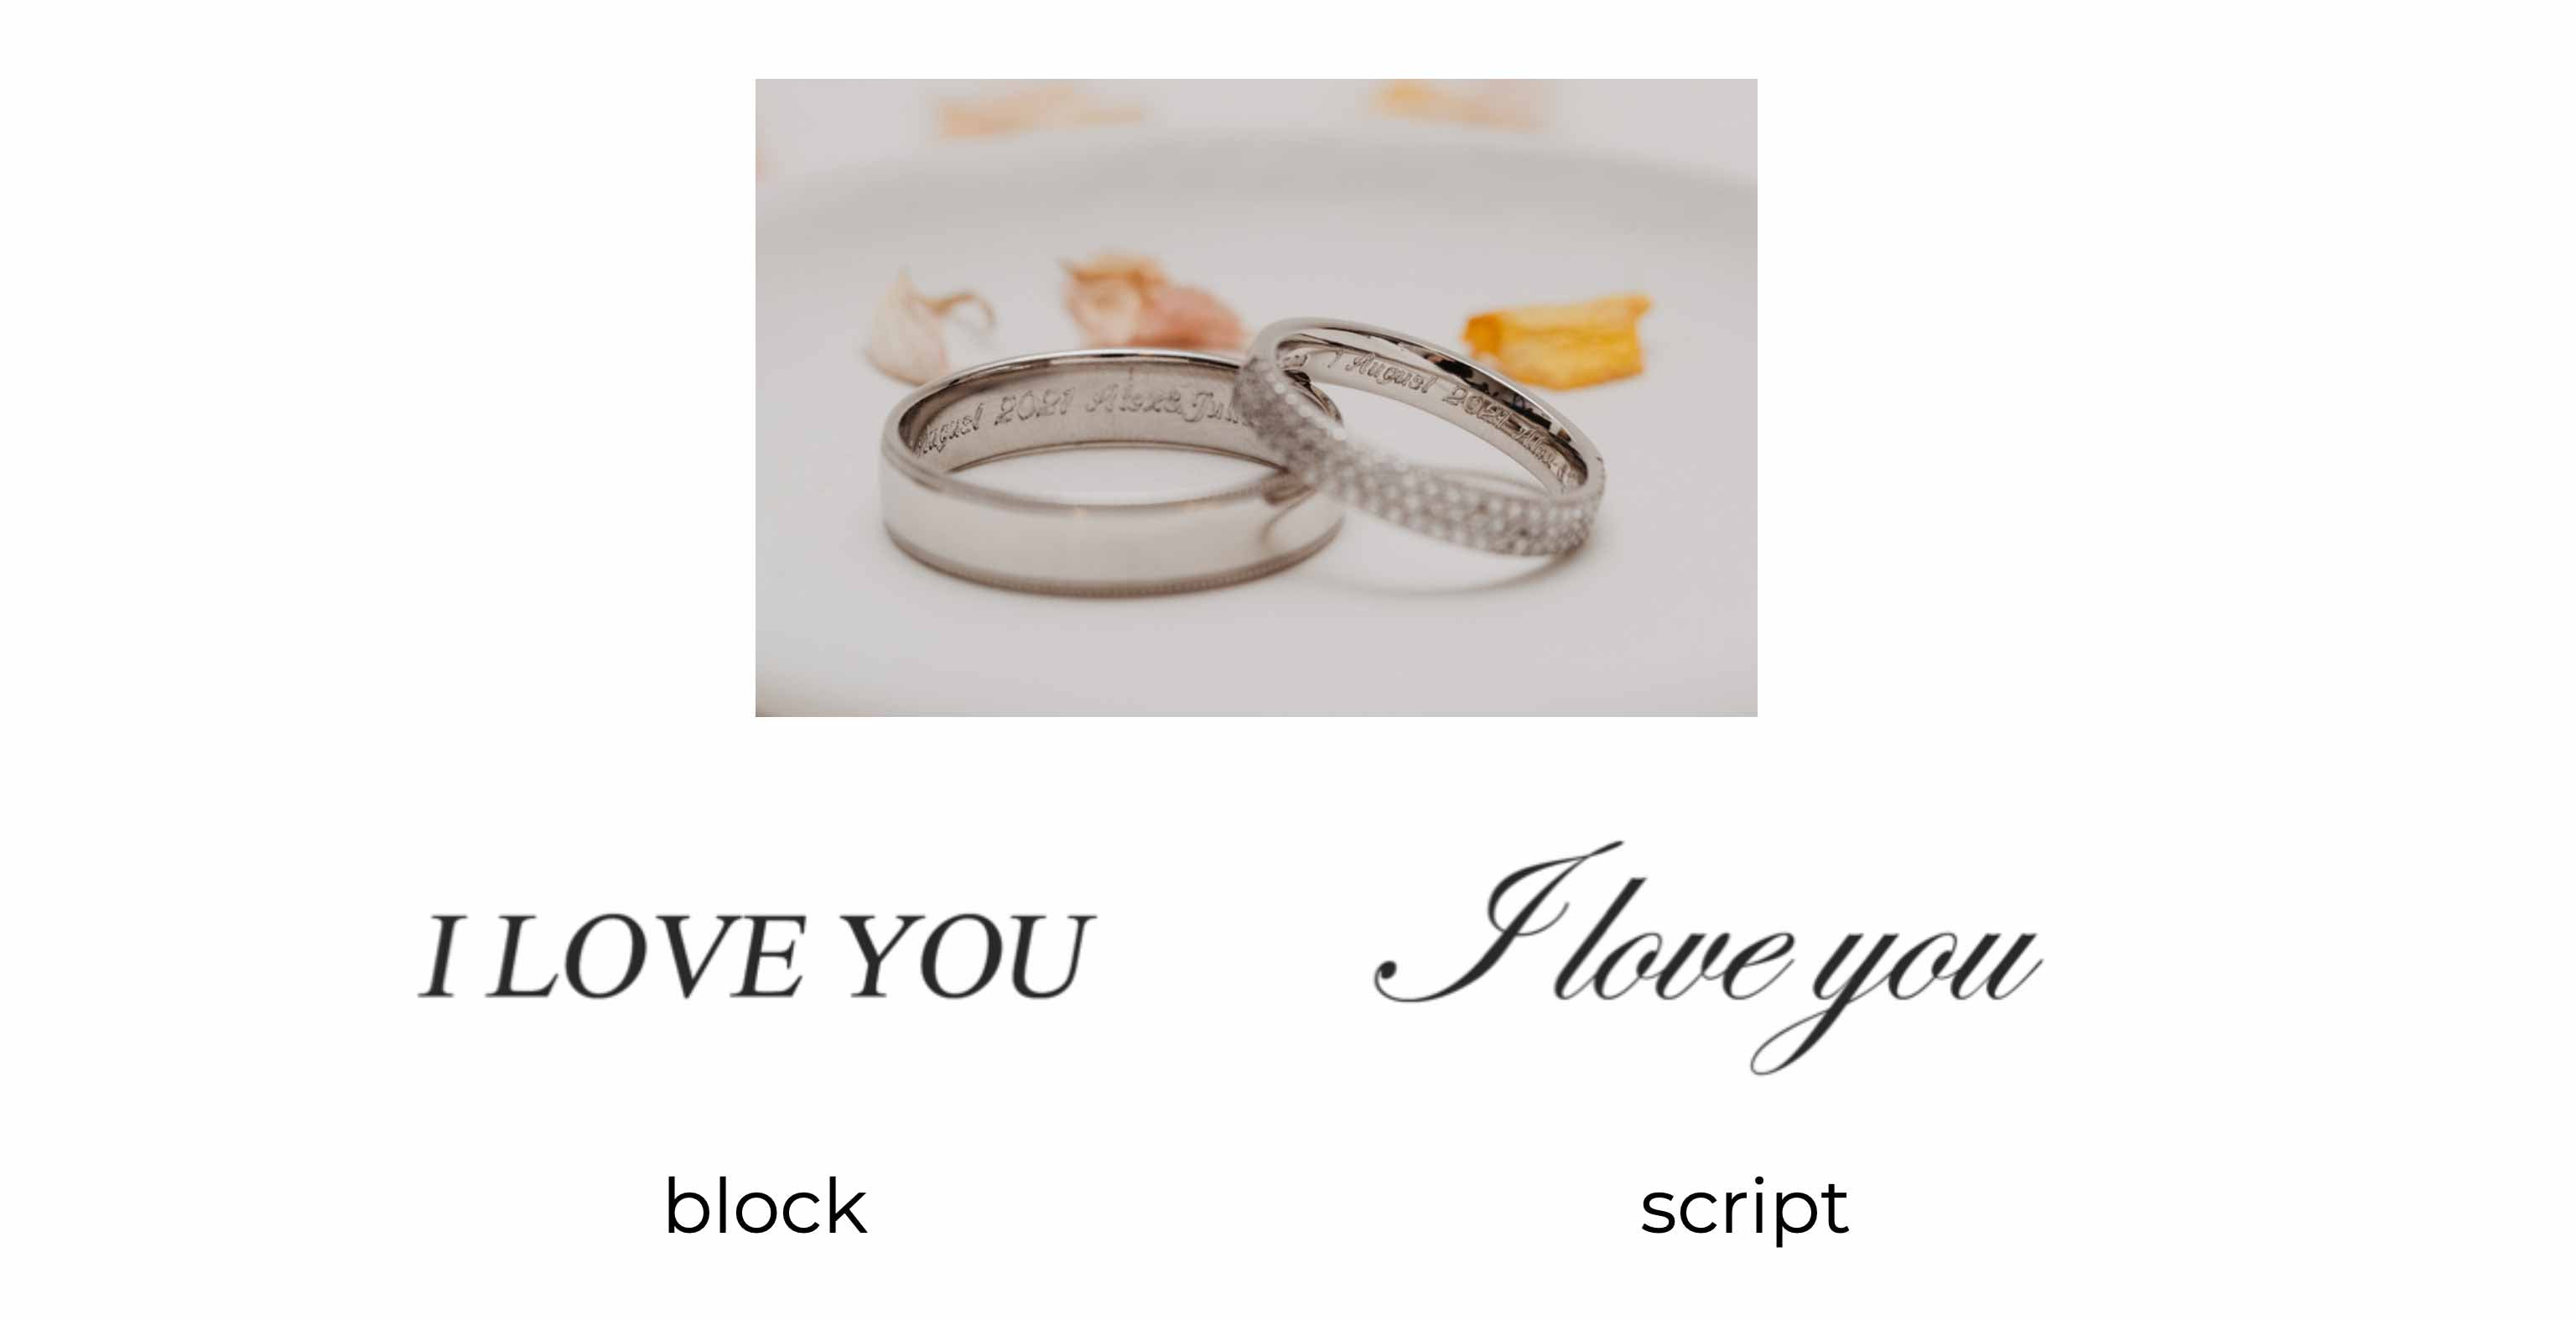 Examples of script and block engraving, both saying I Love You.